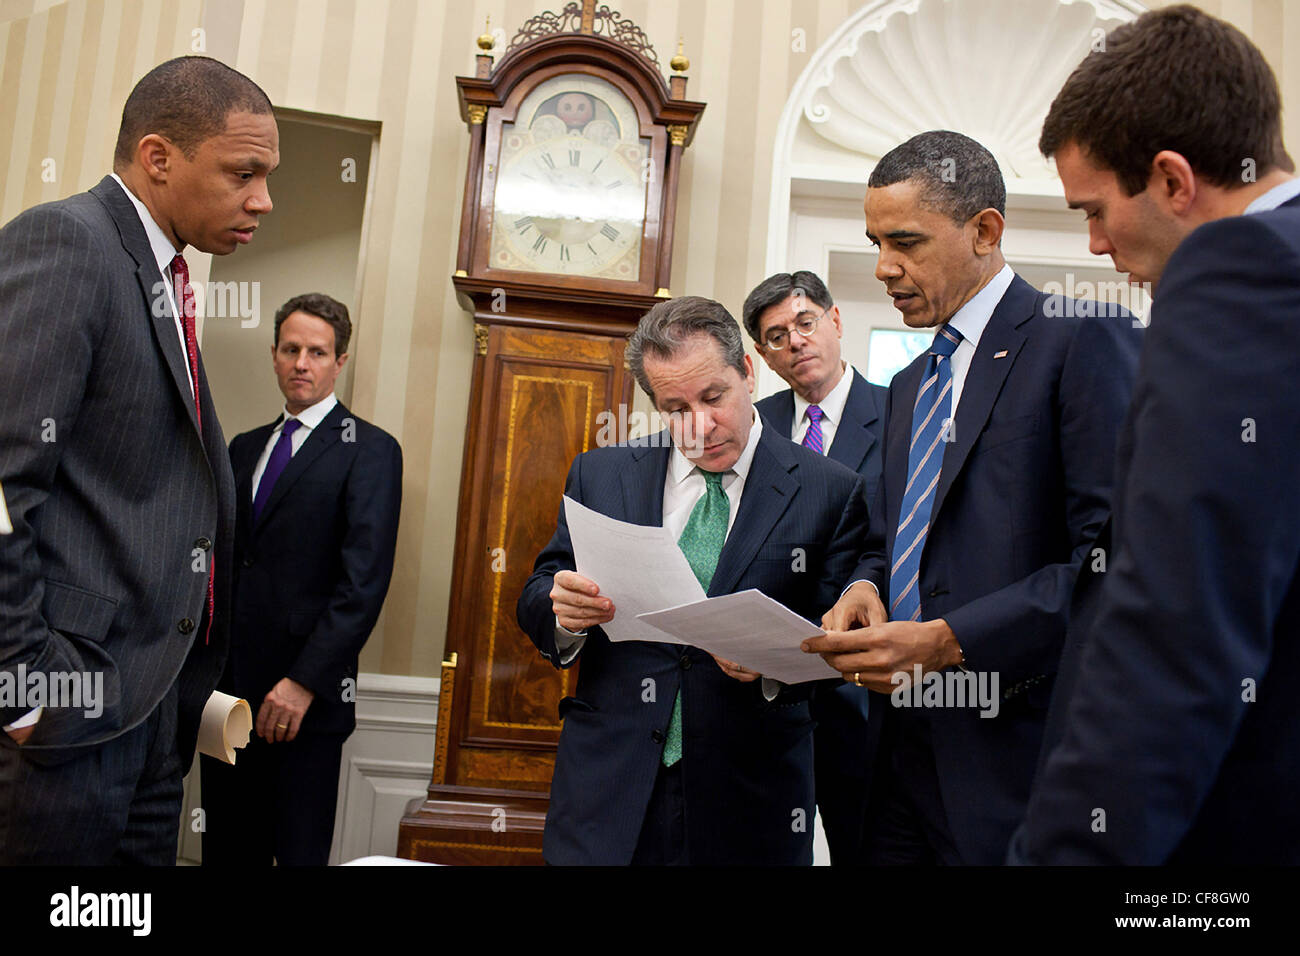 President Barack Obama reviews his fiscal policy speech with advisors in the Oval Office April 13, 2011 in Washington, DC. Stock Photo